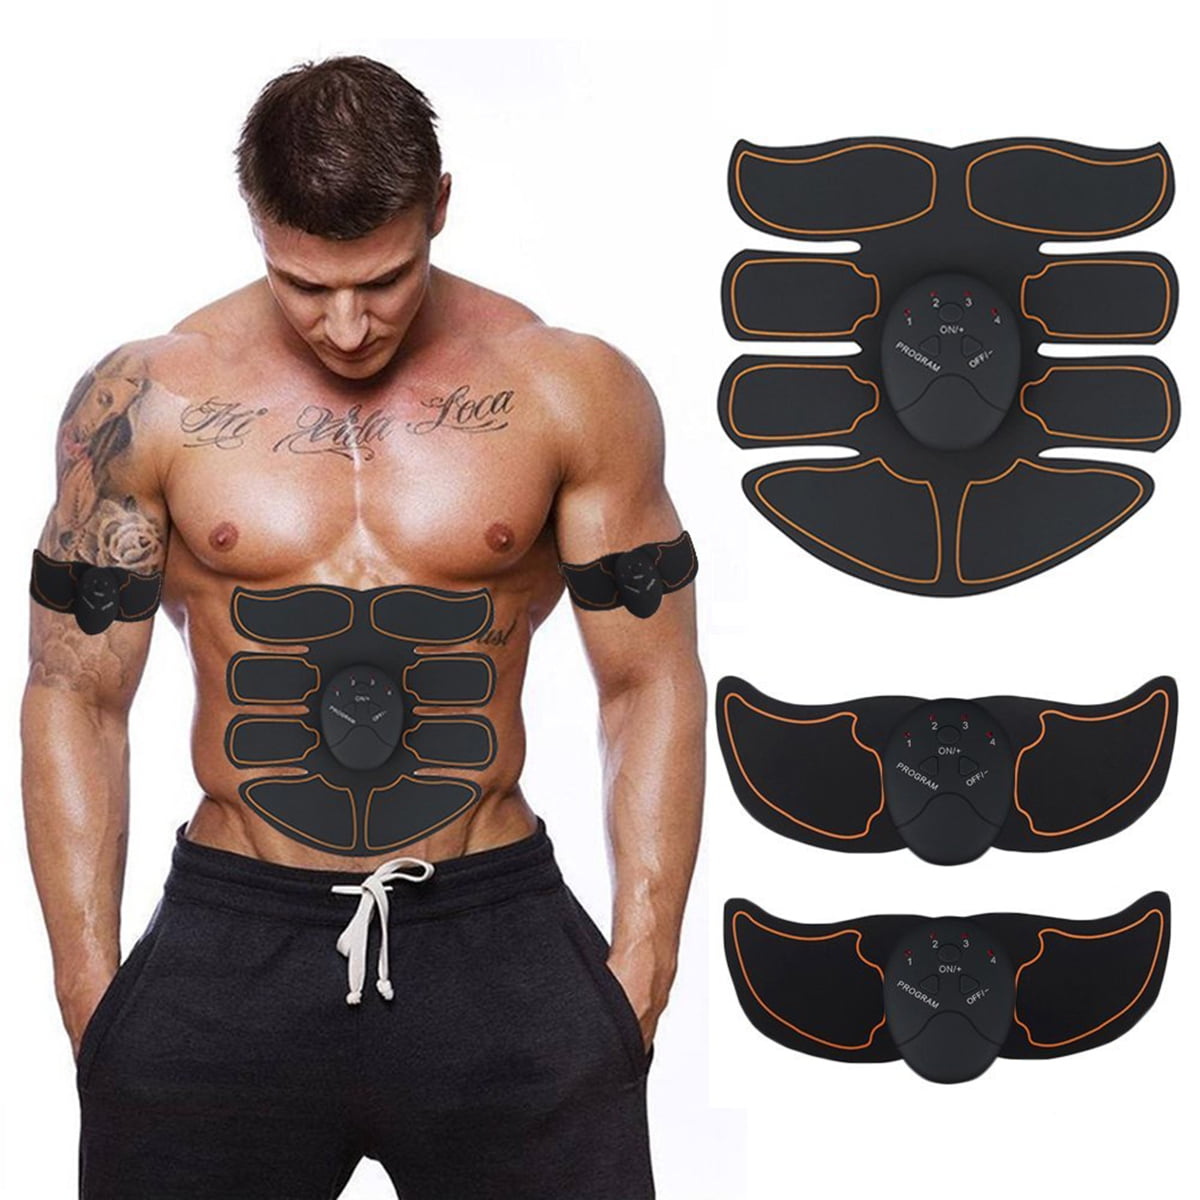 Details about   Muscle Training Gear Body Six pack Fit Set Six Pads Electrical Workout Fitness 